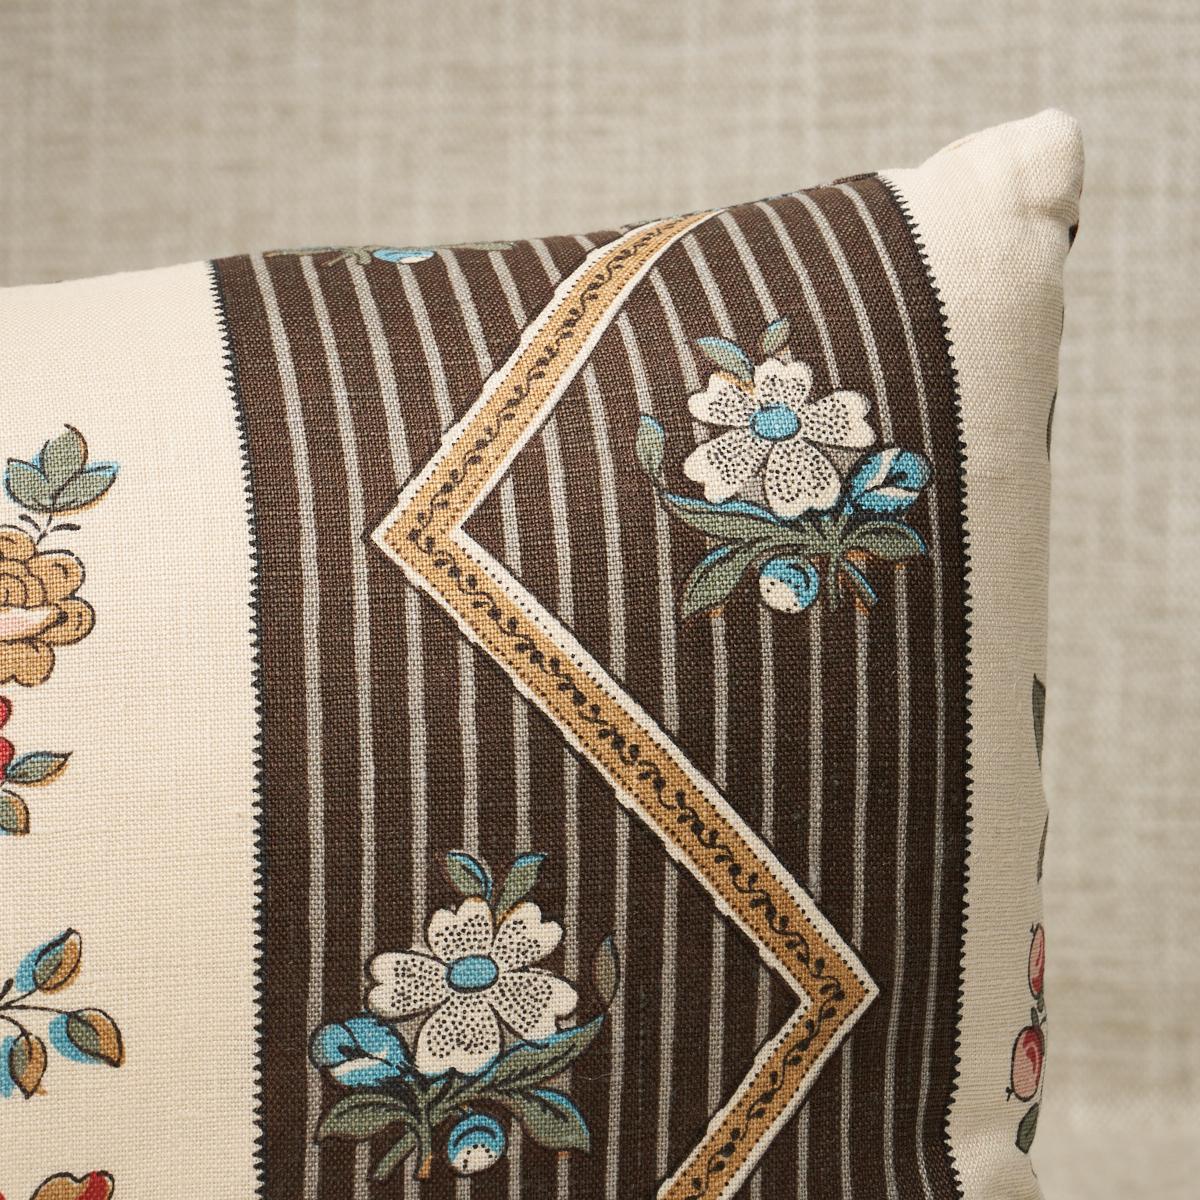 This pillow features Sylvain Floral Stripe with a knife edge finish. Inspired by a French hand-block print, this fantastic floral stripe is table printed on versatile, mid-weight linen. Pillow includes a feather/down fill insert and hidden zipper